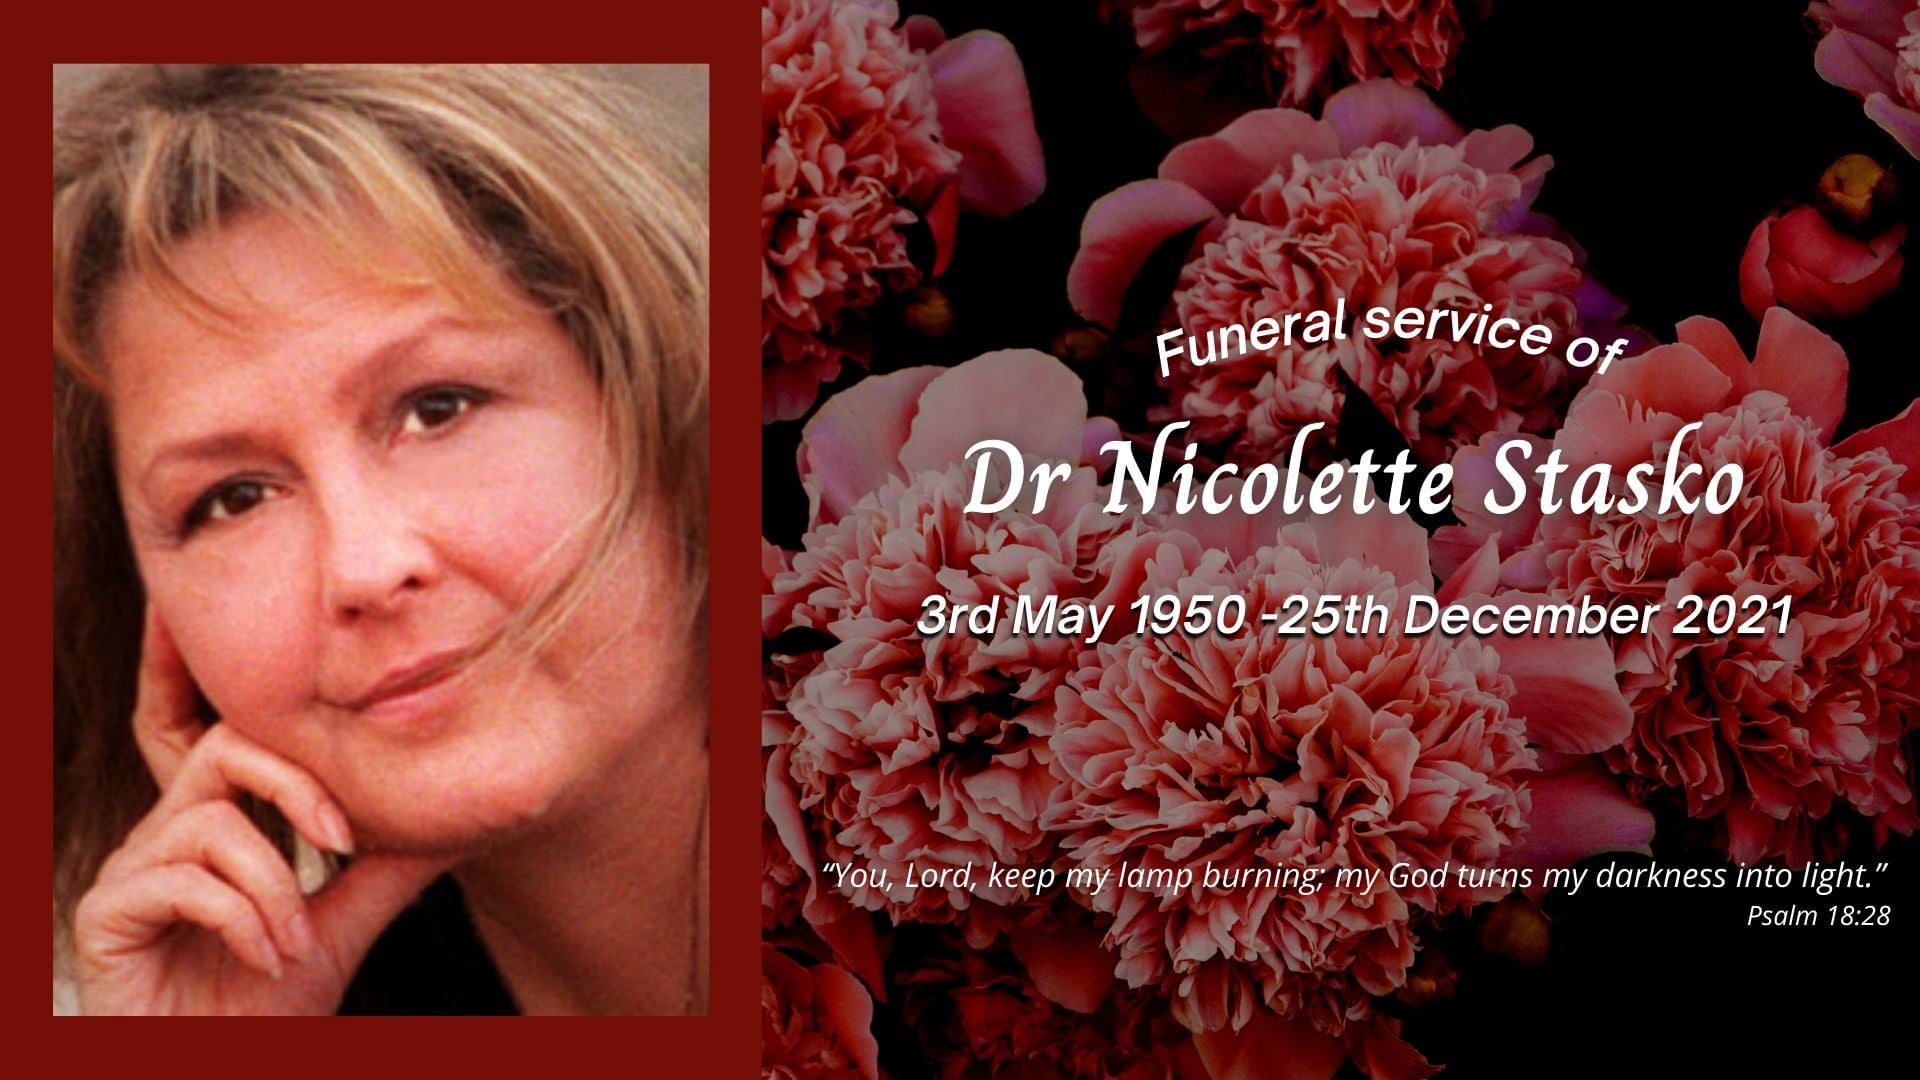 Funeral service of the late Ms Nicolette Stasko